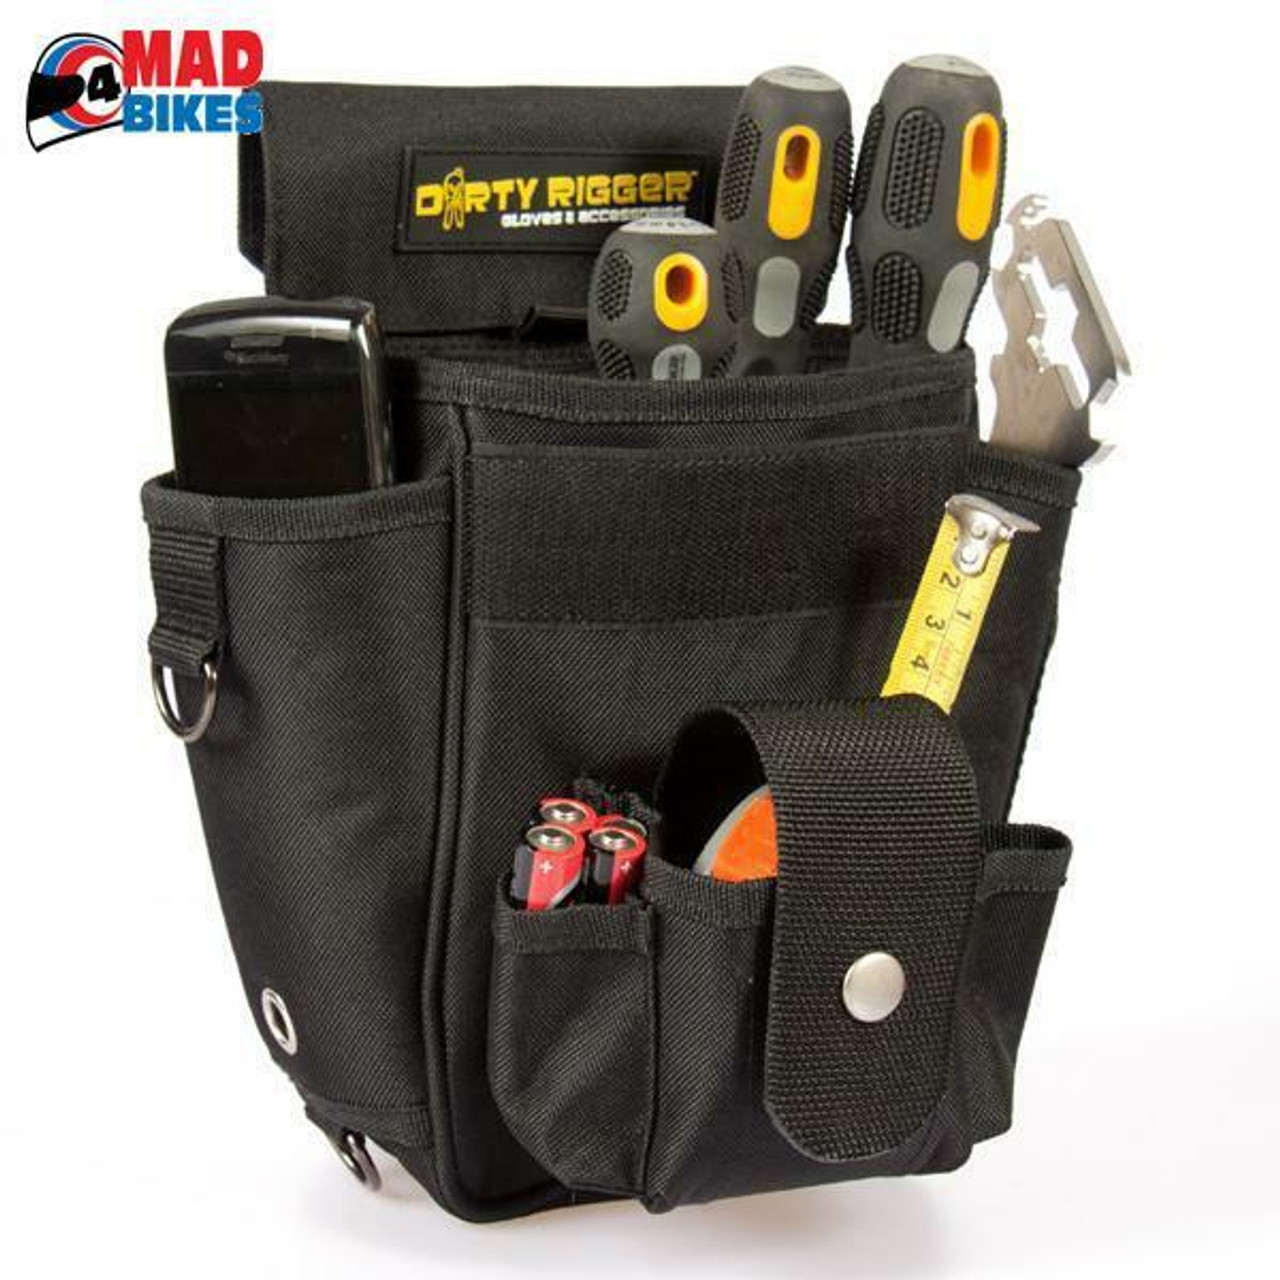 DIRTY RIGGER TECHNICIANS TOOL POUCH, SOUND, LIGHT, VISUAL, RIGGING